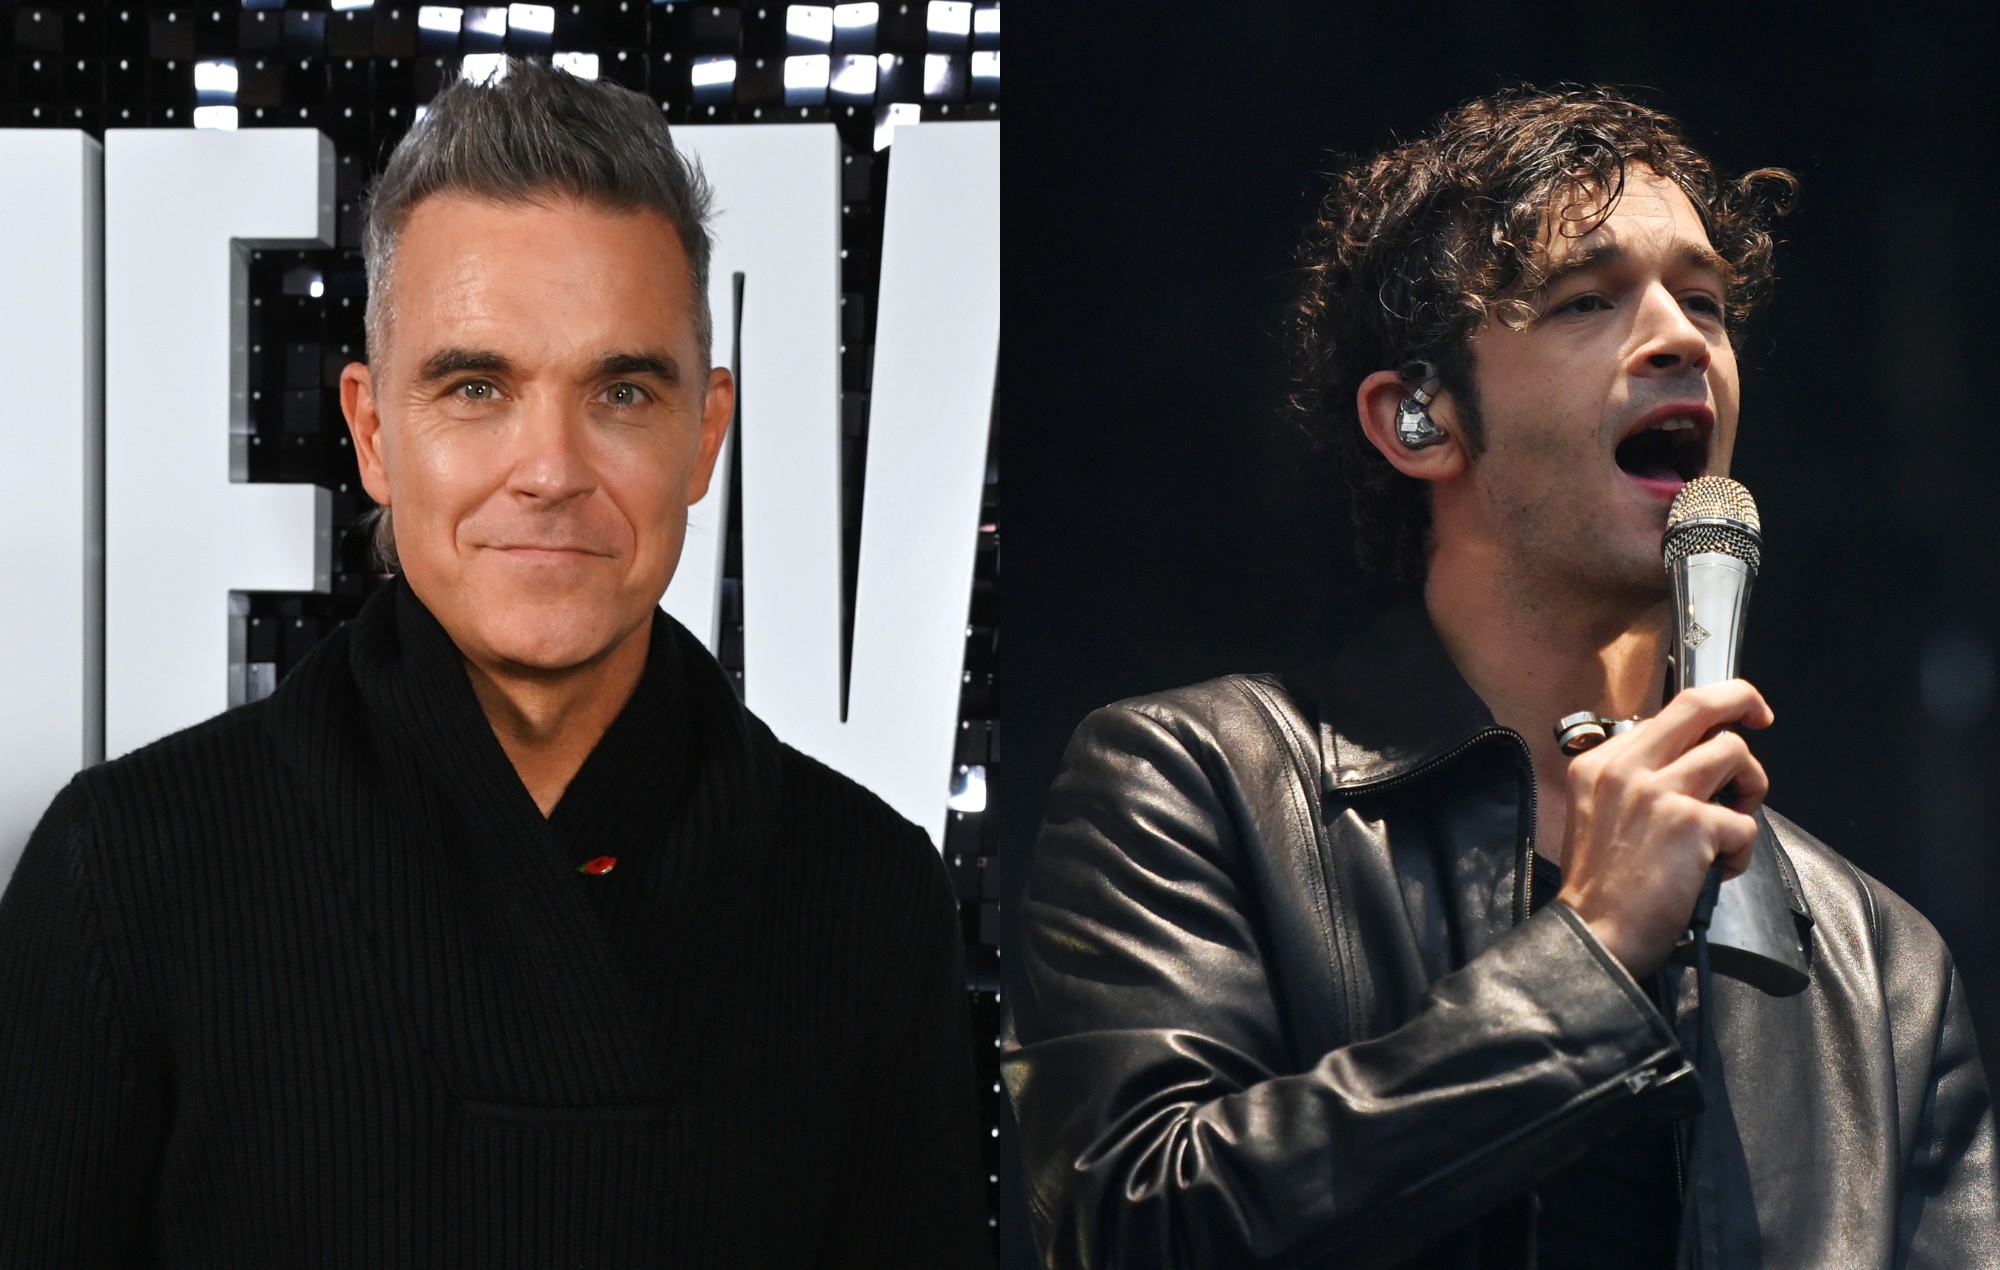 Robbie Williams shares his opinion on The 1975’s Matty Healy